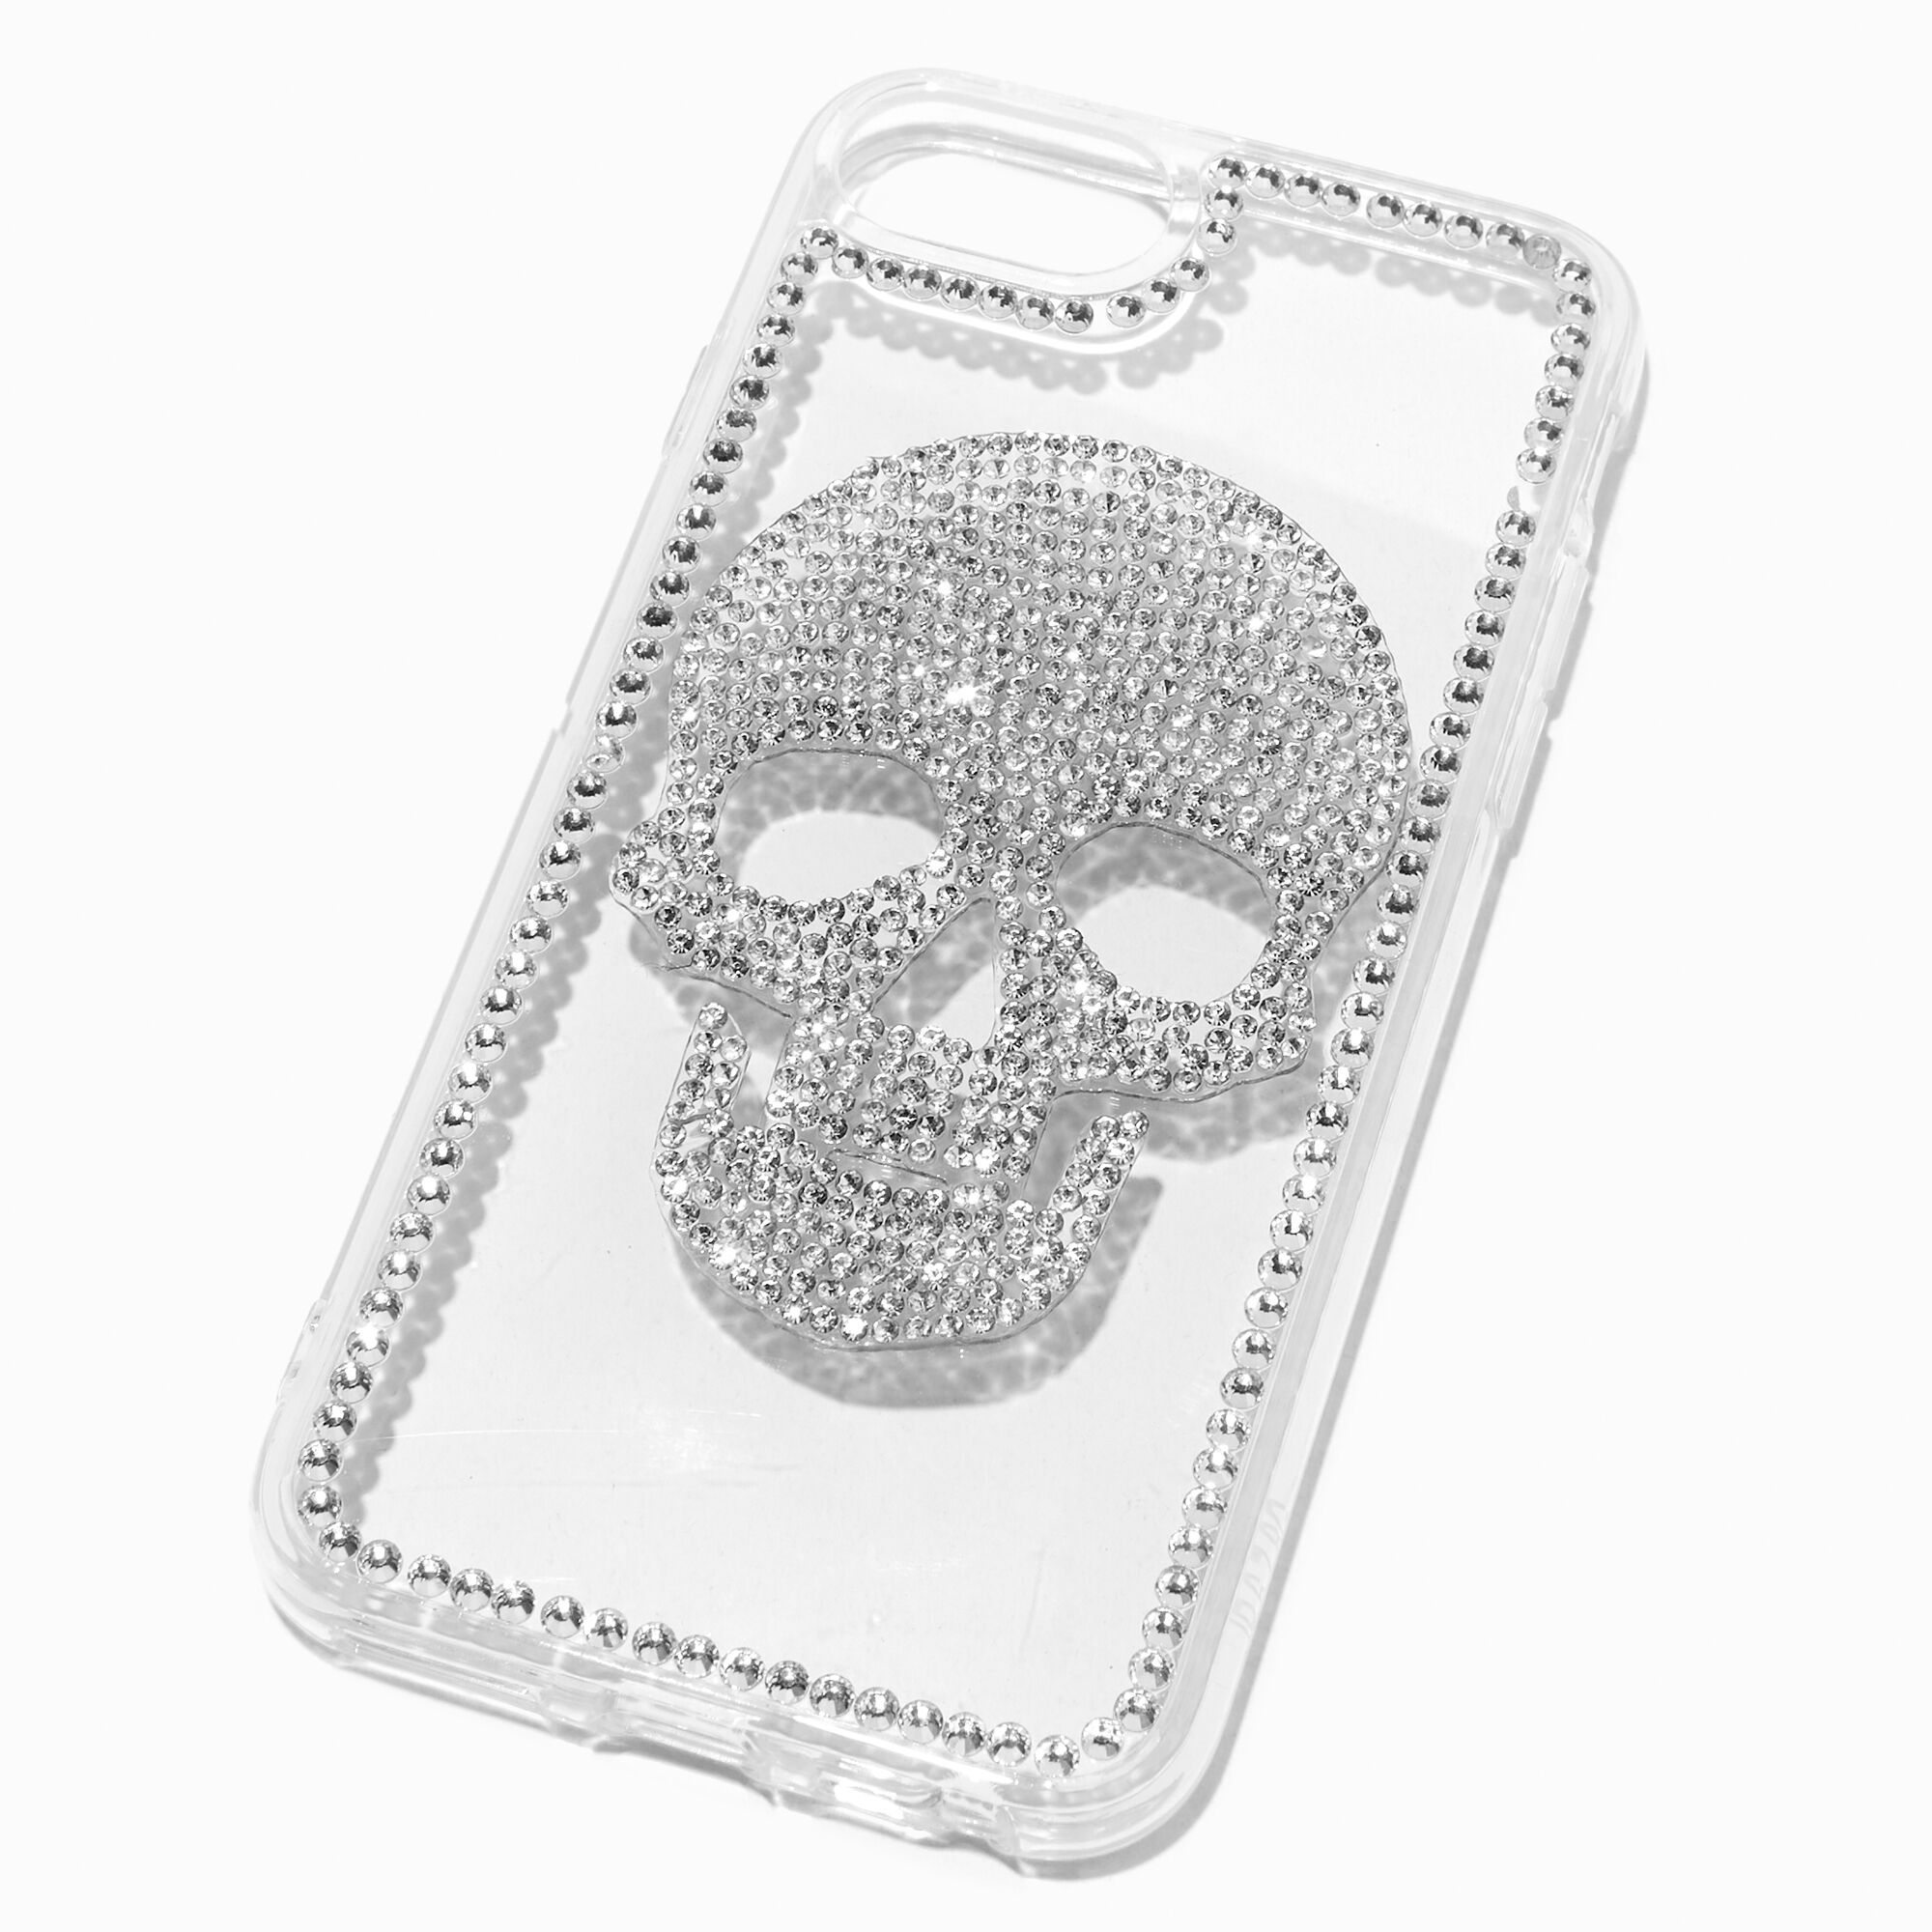 View Claires Bling Skull Protective Phone Case Fits Iphone 678 Se information